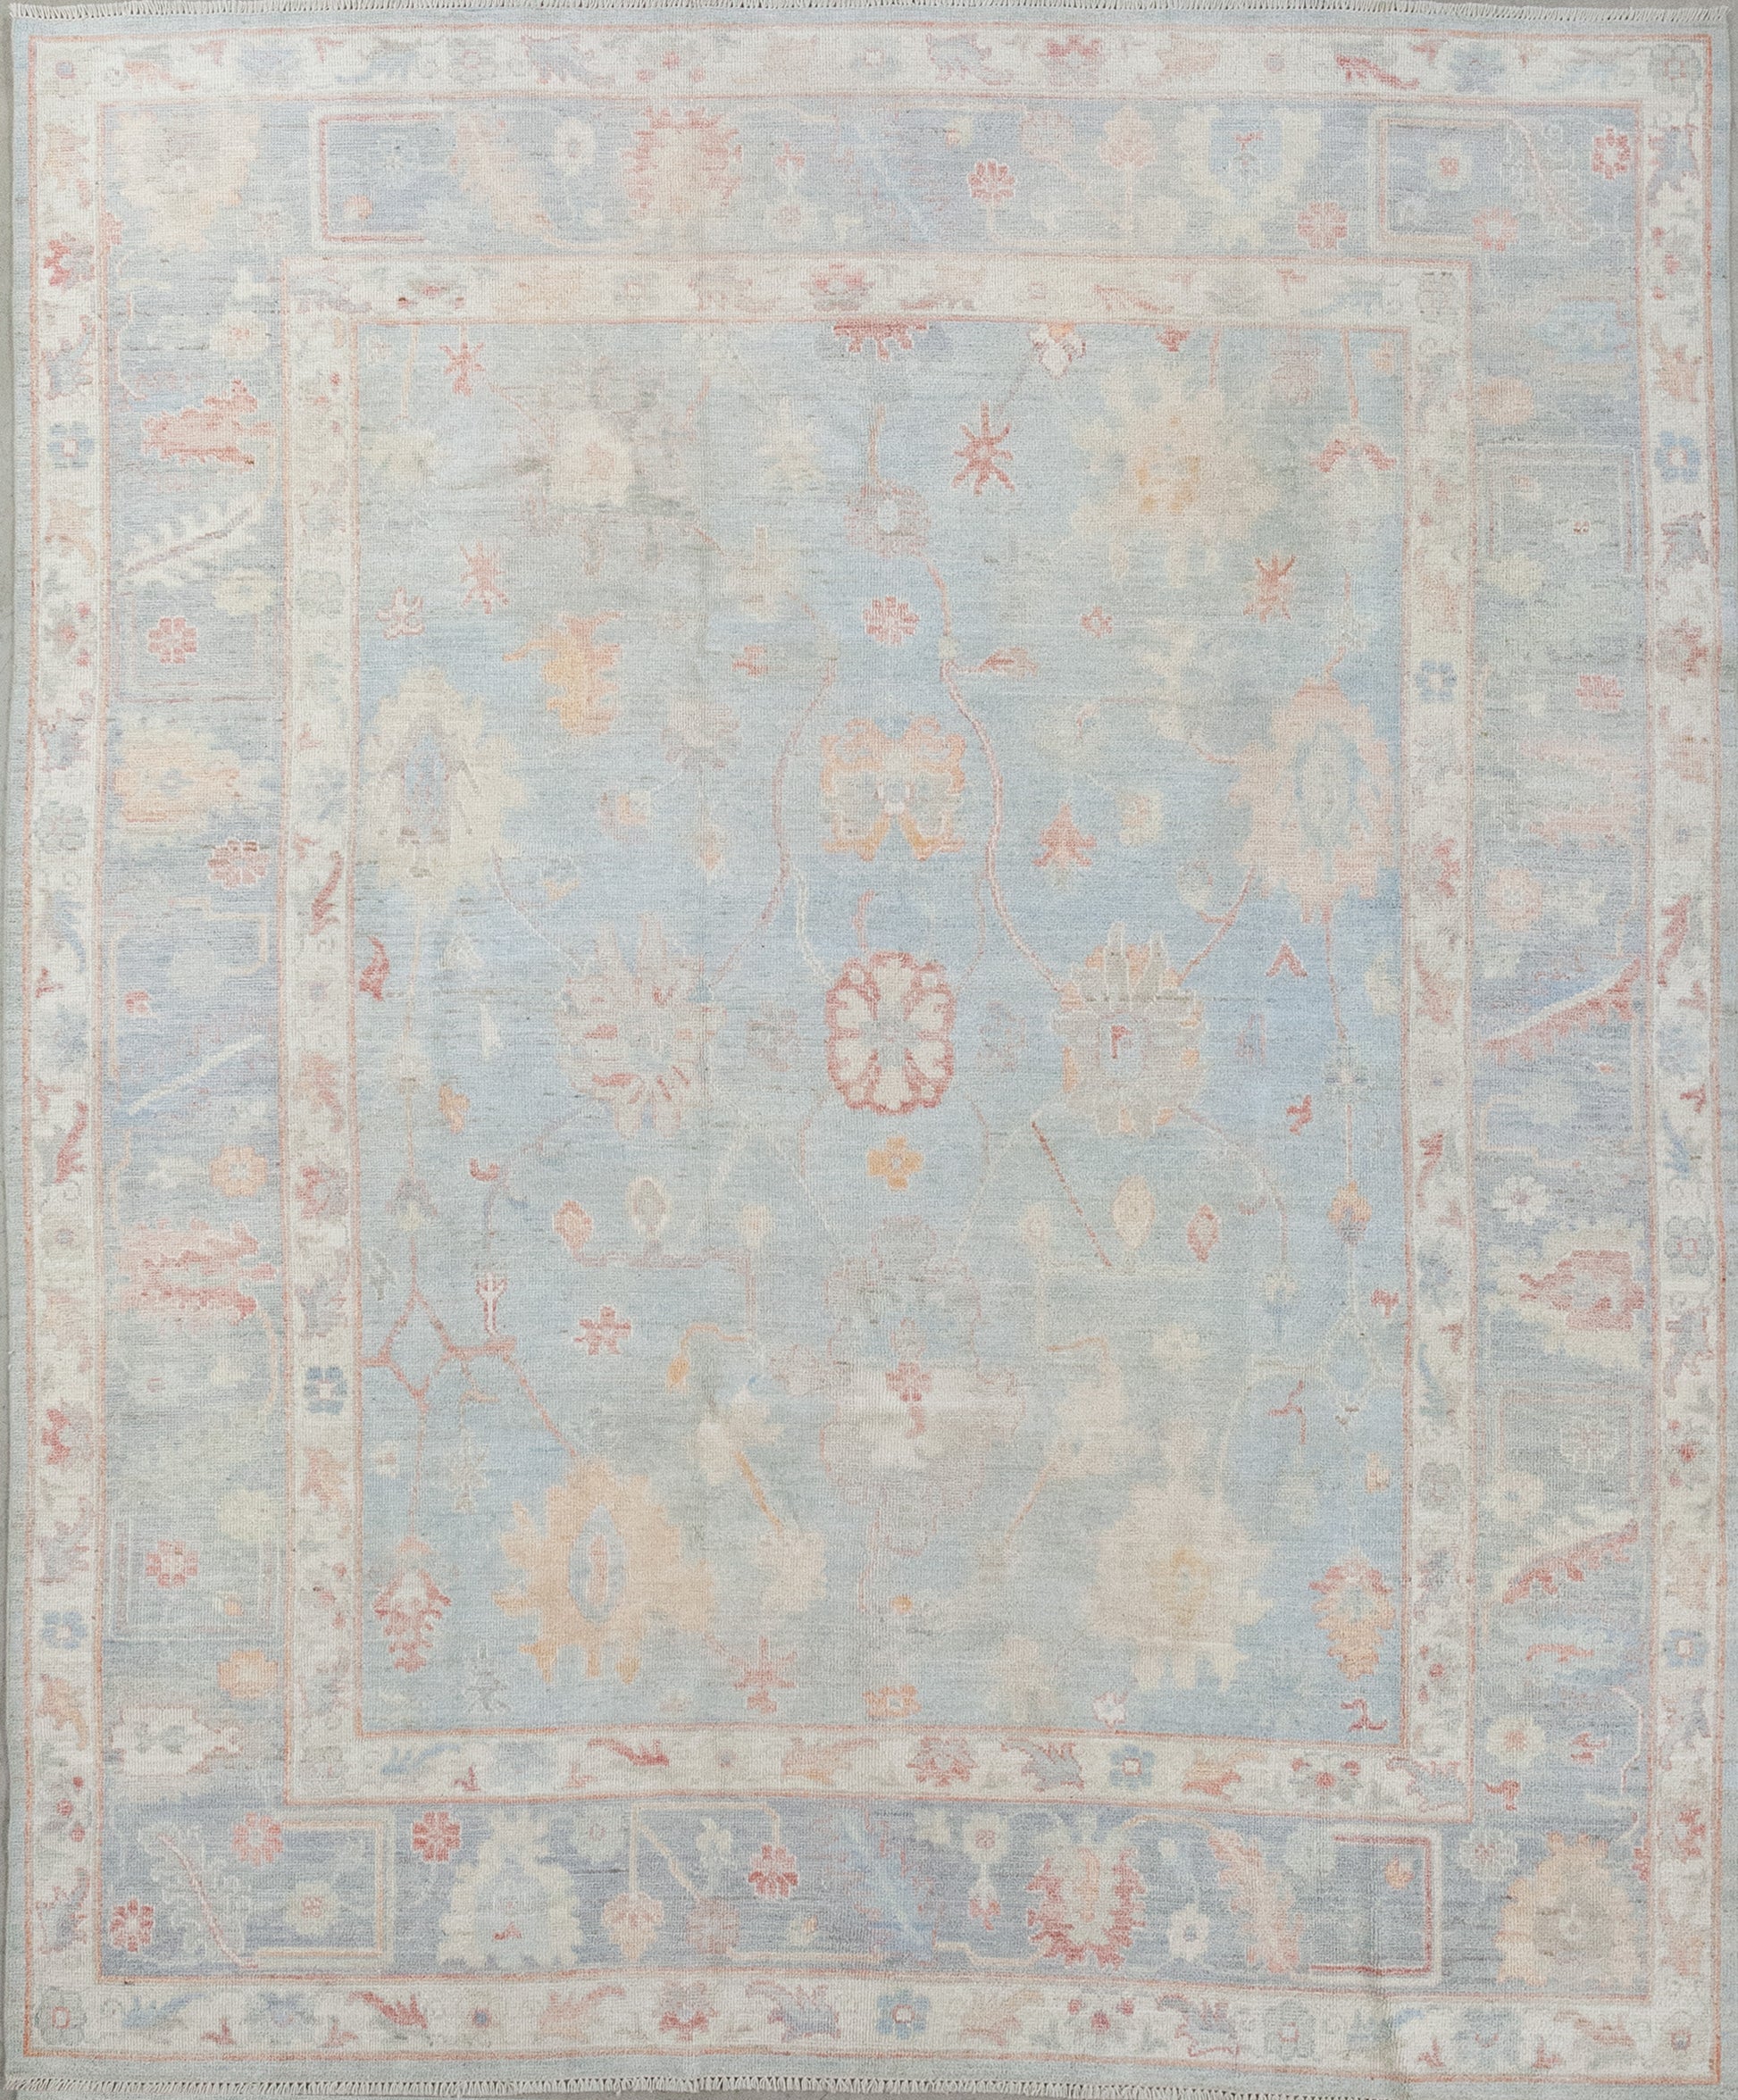 This elegant rug was woven in a simple color scheme that has variations of blue as the main tone plus red, yellow and green accents. The design features an abstraction of sunflowers, white jasmine, and other types of flowers.